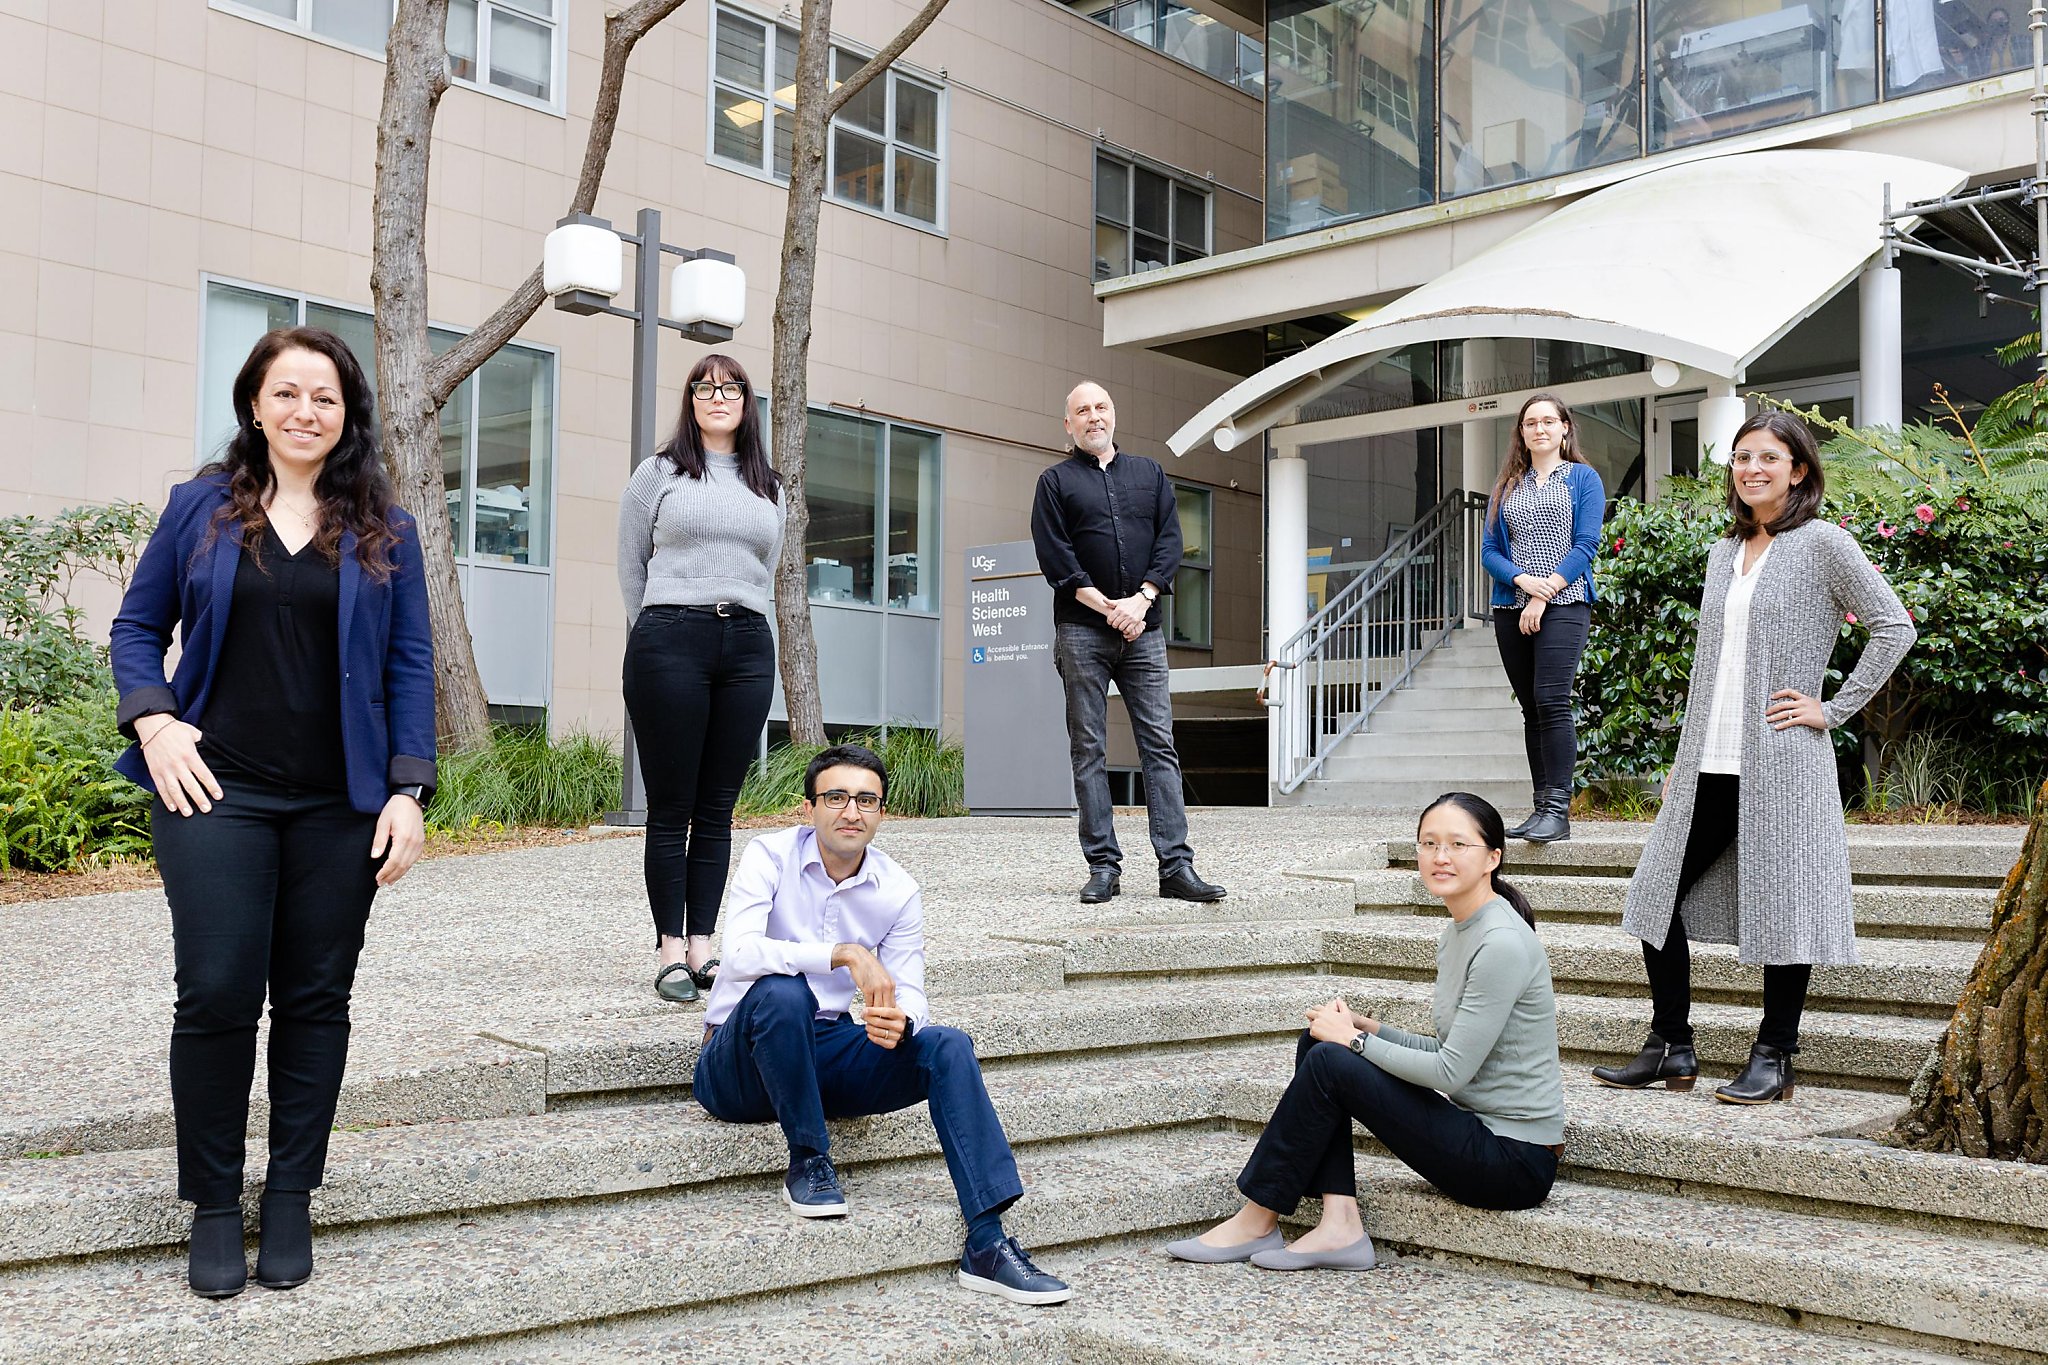 How UCSF’s data science team took on COVID